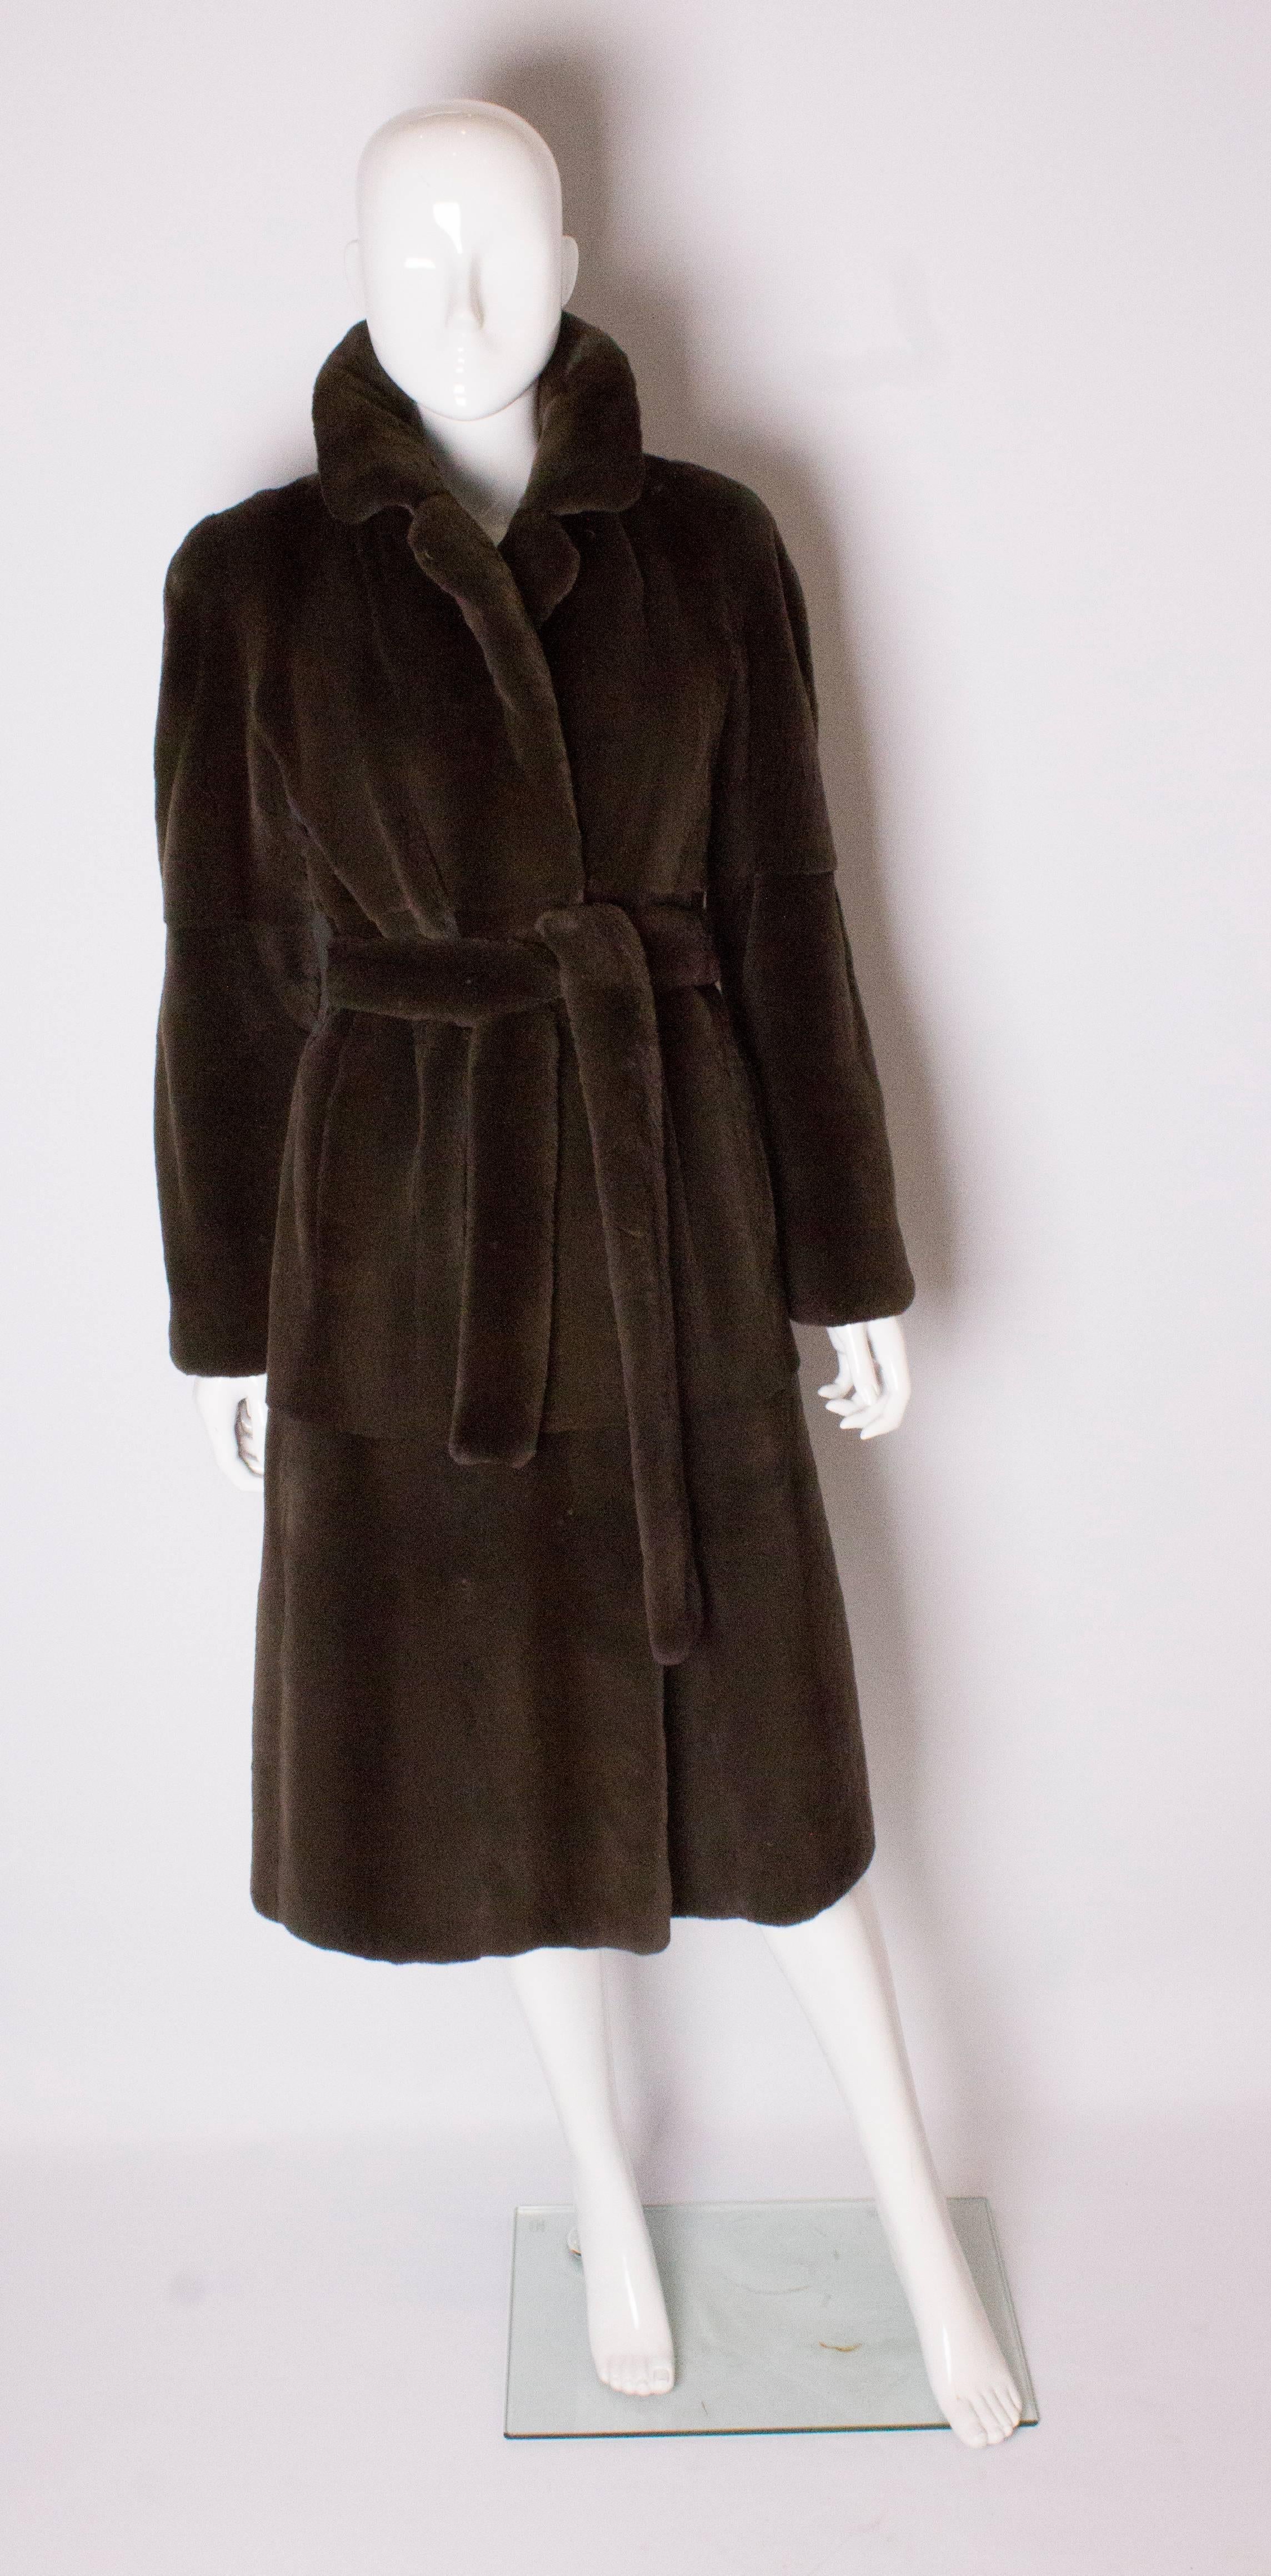 A great sheared mink coat in a wonderful chocolate brown colour. The coat has lapels ,is fully lined, has a tie belt, and the back vent can be unbuttoned.